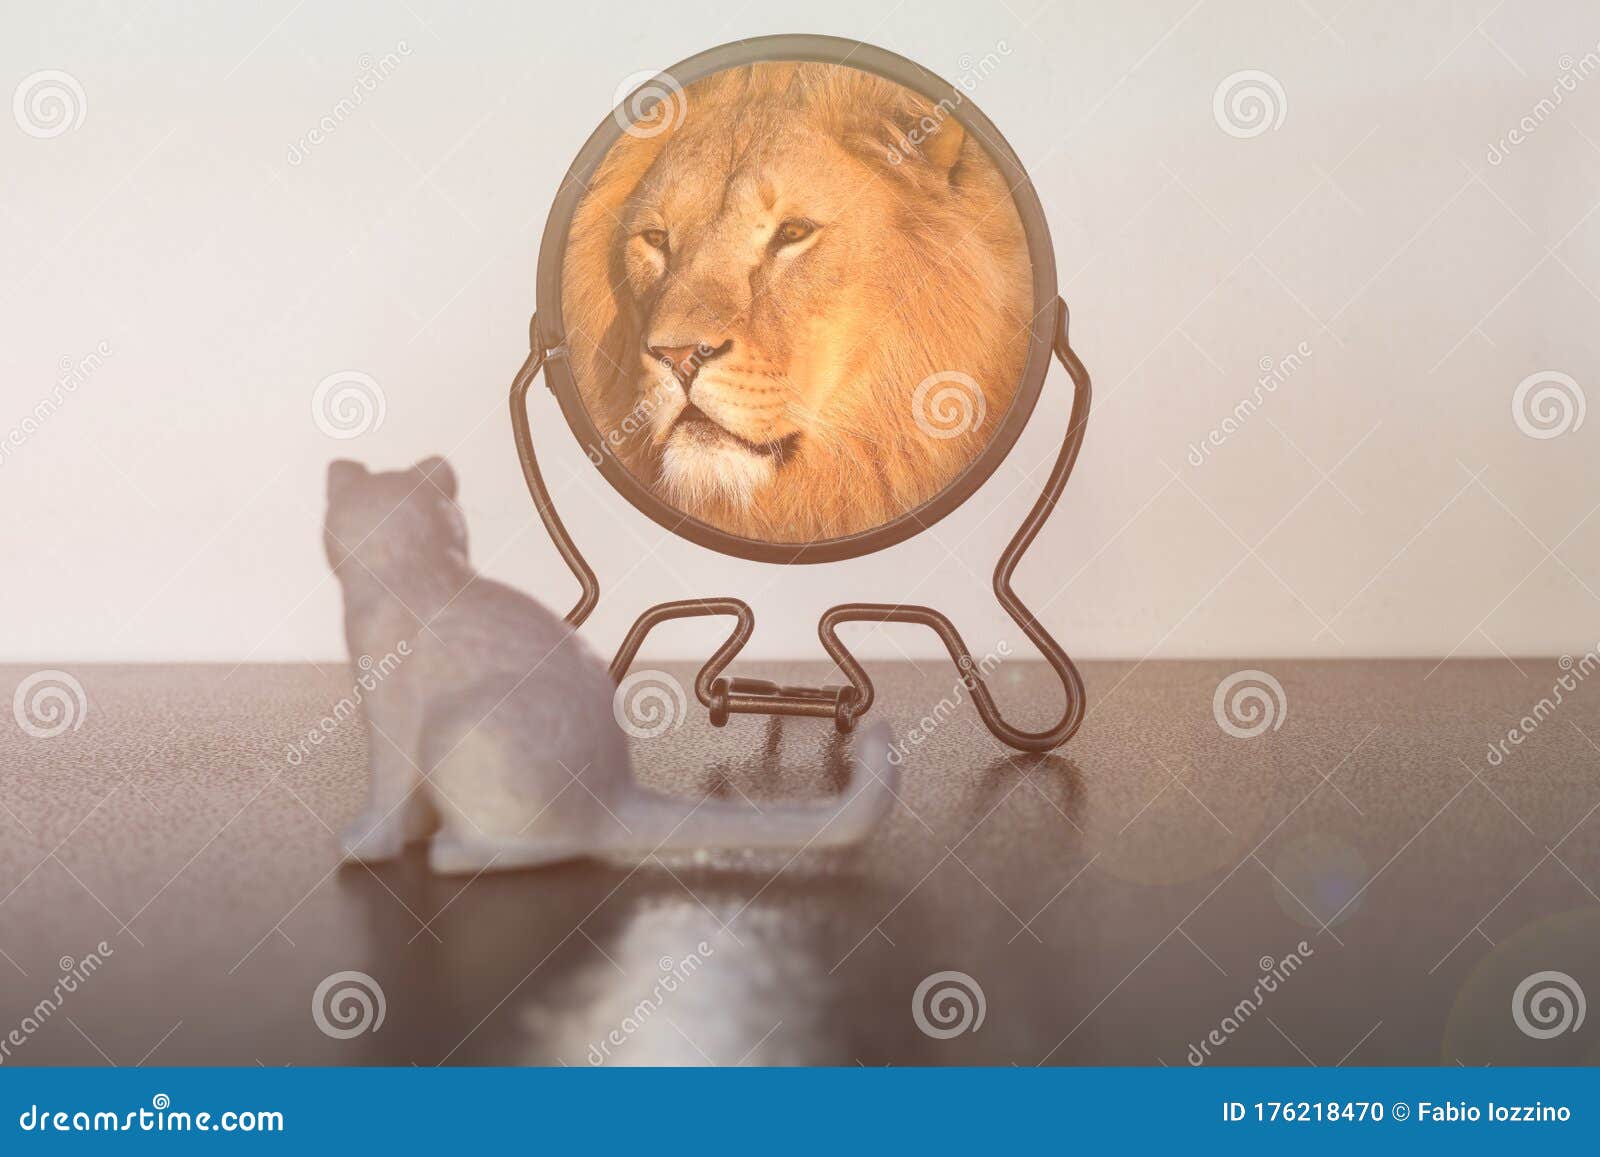 kitten looks in the mirror and sees himself reflected like a lion. self-confidence concept. business or personal growth